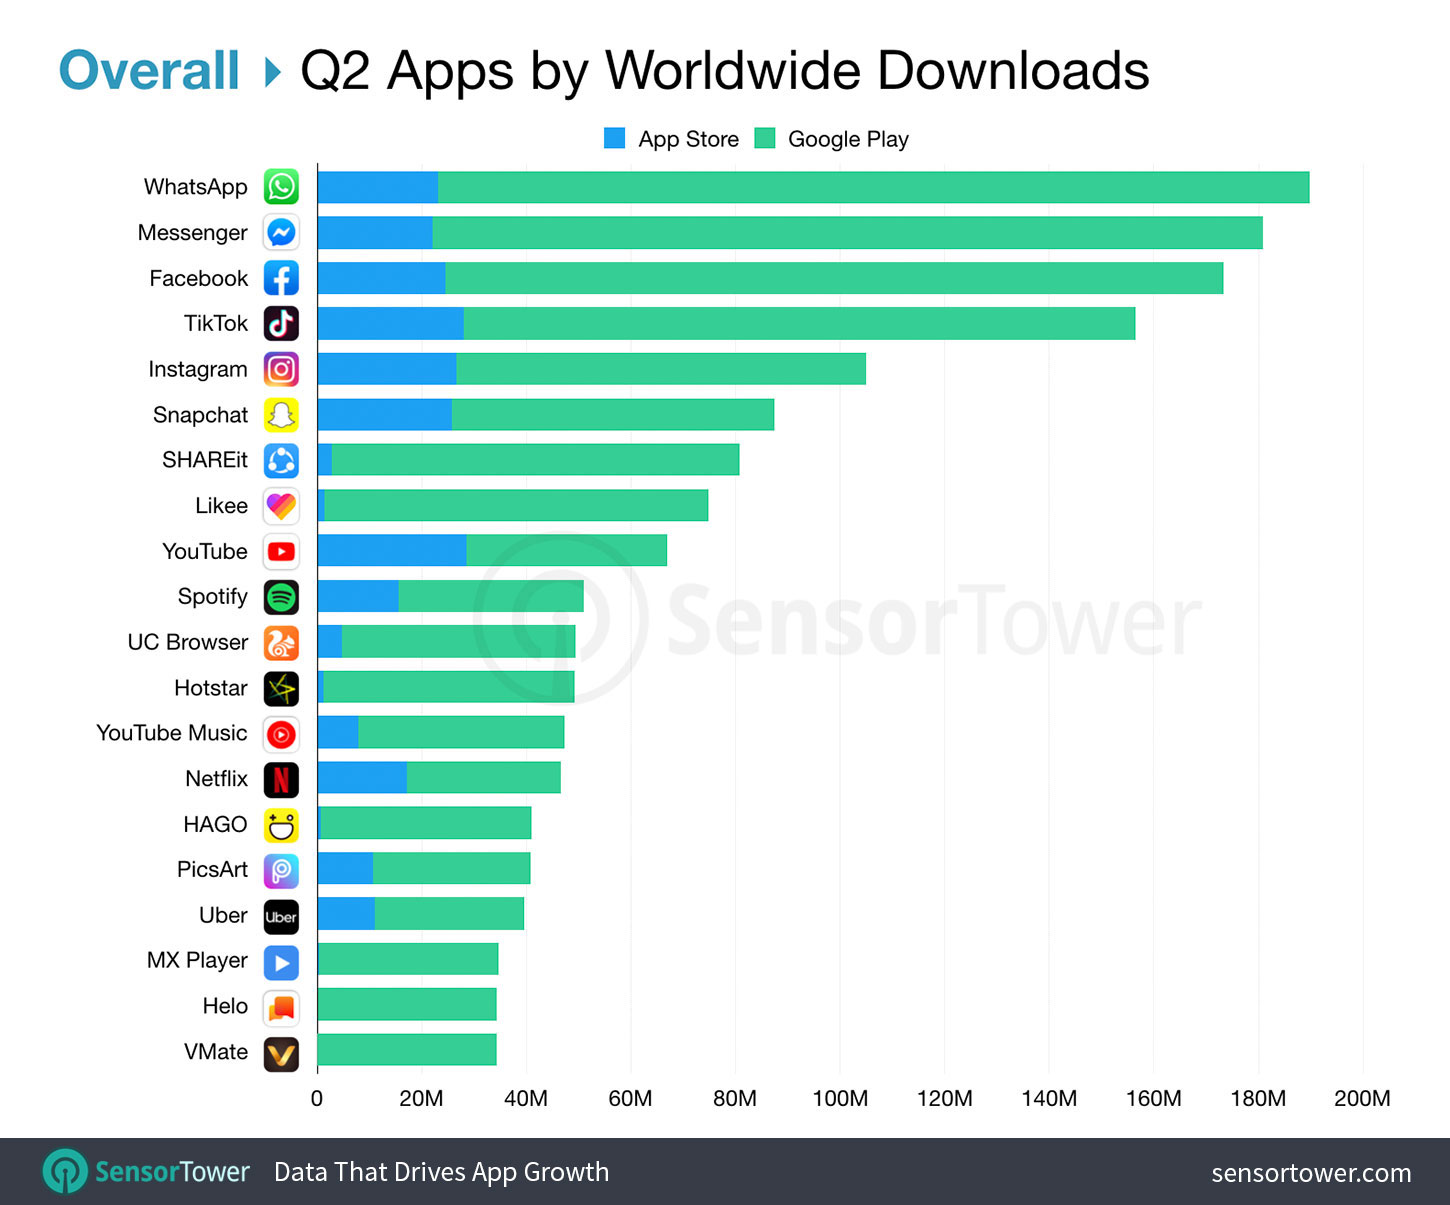 Top Apps Worldwide Overall for Q2 2019